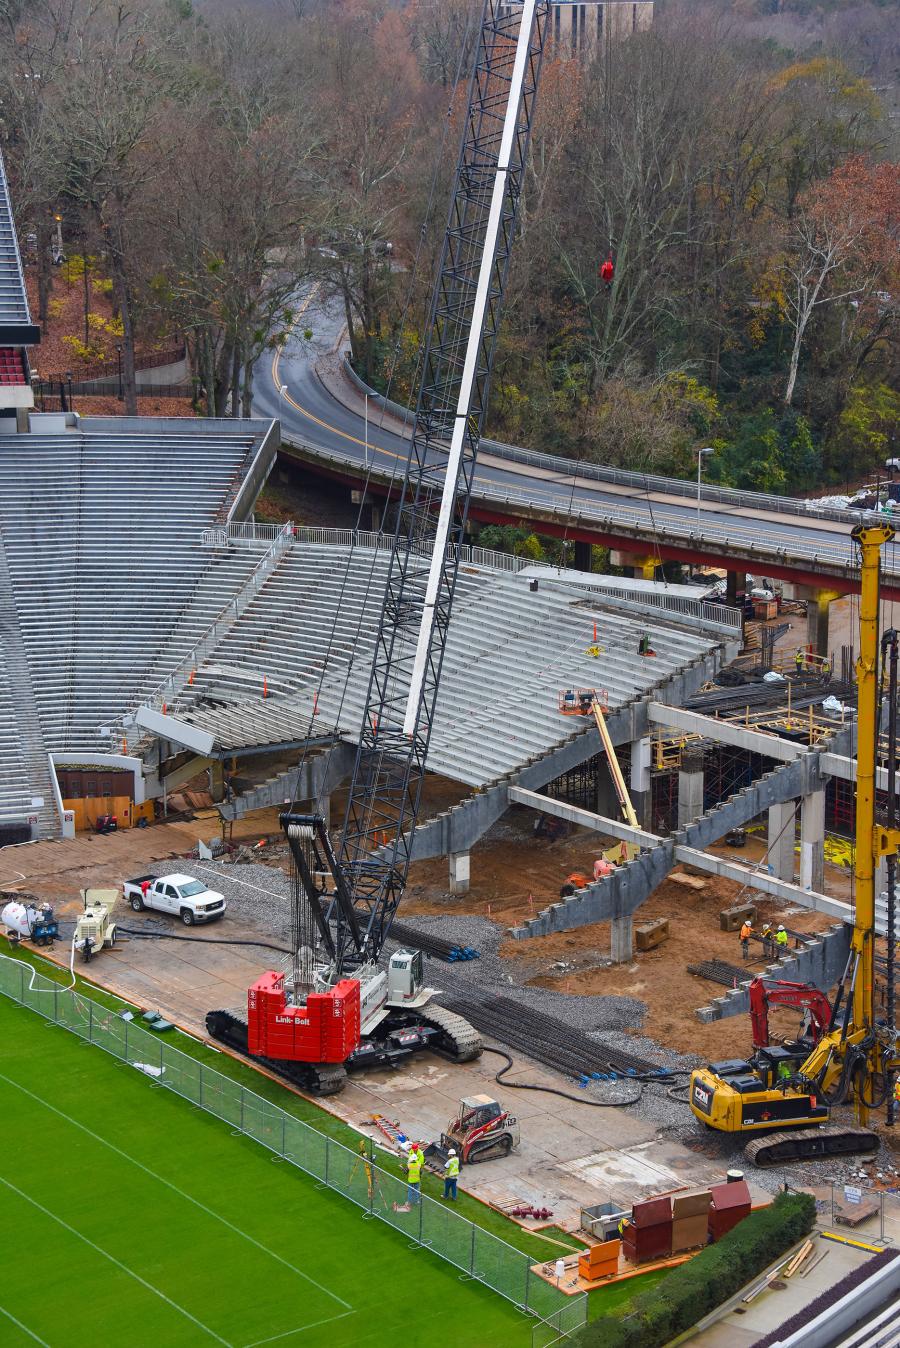 348 H5 Lifts Between the Hedges at University of Georgia : CEG